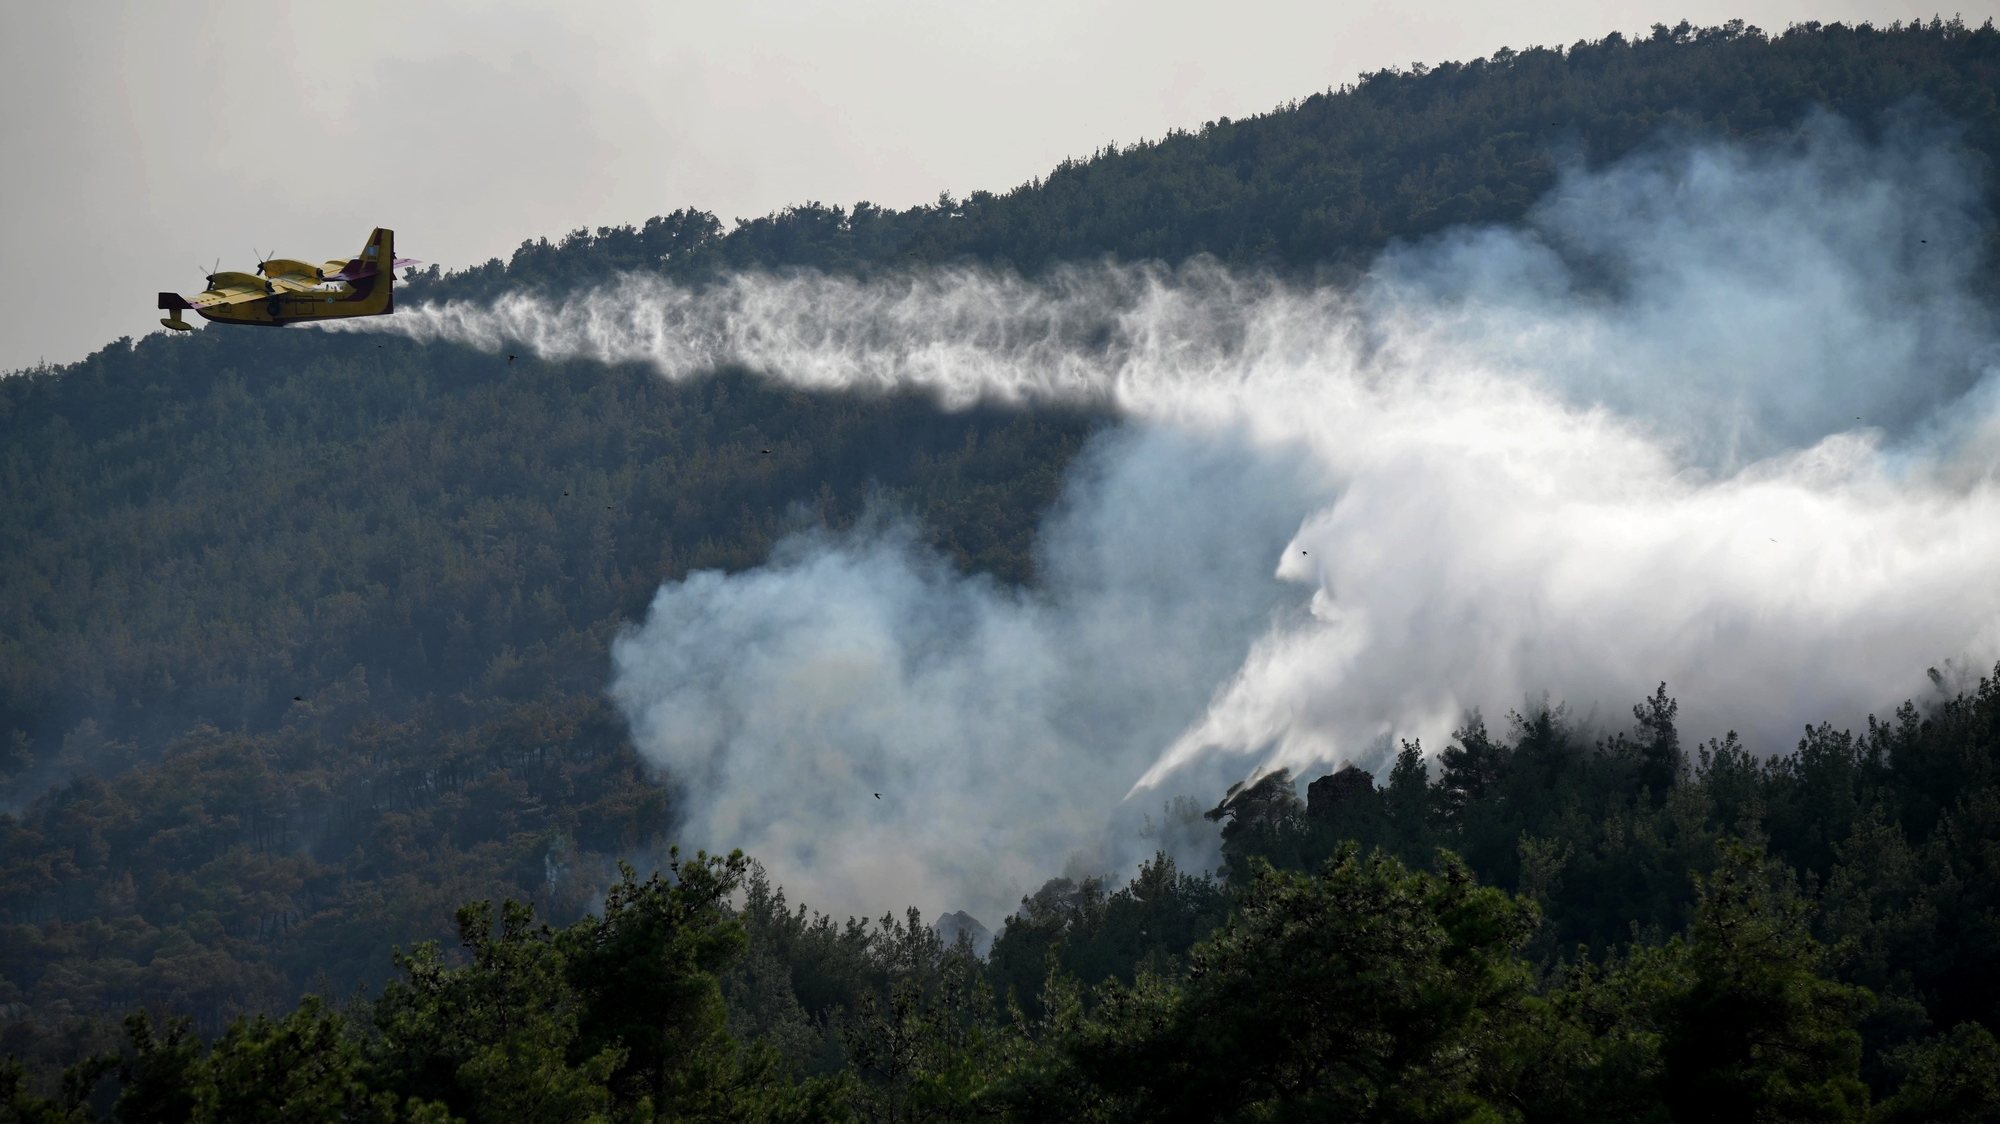 epa10818408 A firefighting aircraft operates during a wildfire at Dadia forest, Thrace, northern Greece, 24 August 2023. Greek and foreign firefighters and volunteers, along with land and air assistance, battled for a sixth day to contain and put out the large fire in the natural habitat of the Dadia Forest. The forest has suffered extensive damage and it is feared that Black Vultures (Aegypius monachus) that live in the forest along with another 35 species of birds of prey will be greatly affected. The smoke that has covered the area has made assessment of the damage impossible. Albanian firefighters who arrived with five fire trucks relieved their colleagues from Romania, while firefighters from the Czech Republic surveyed the area to organize their operations in the coming days.  EPA/DIMITRIS ALEXOUDIS